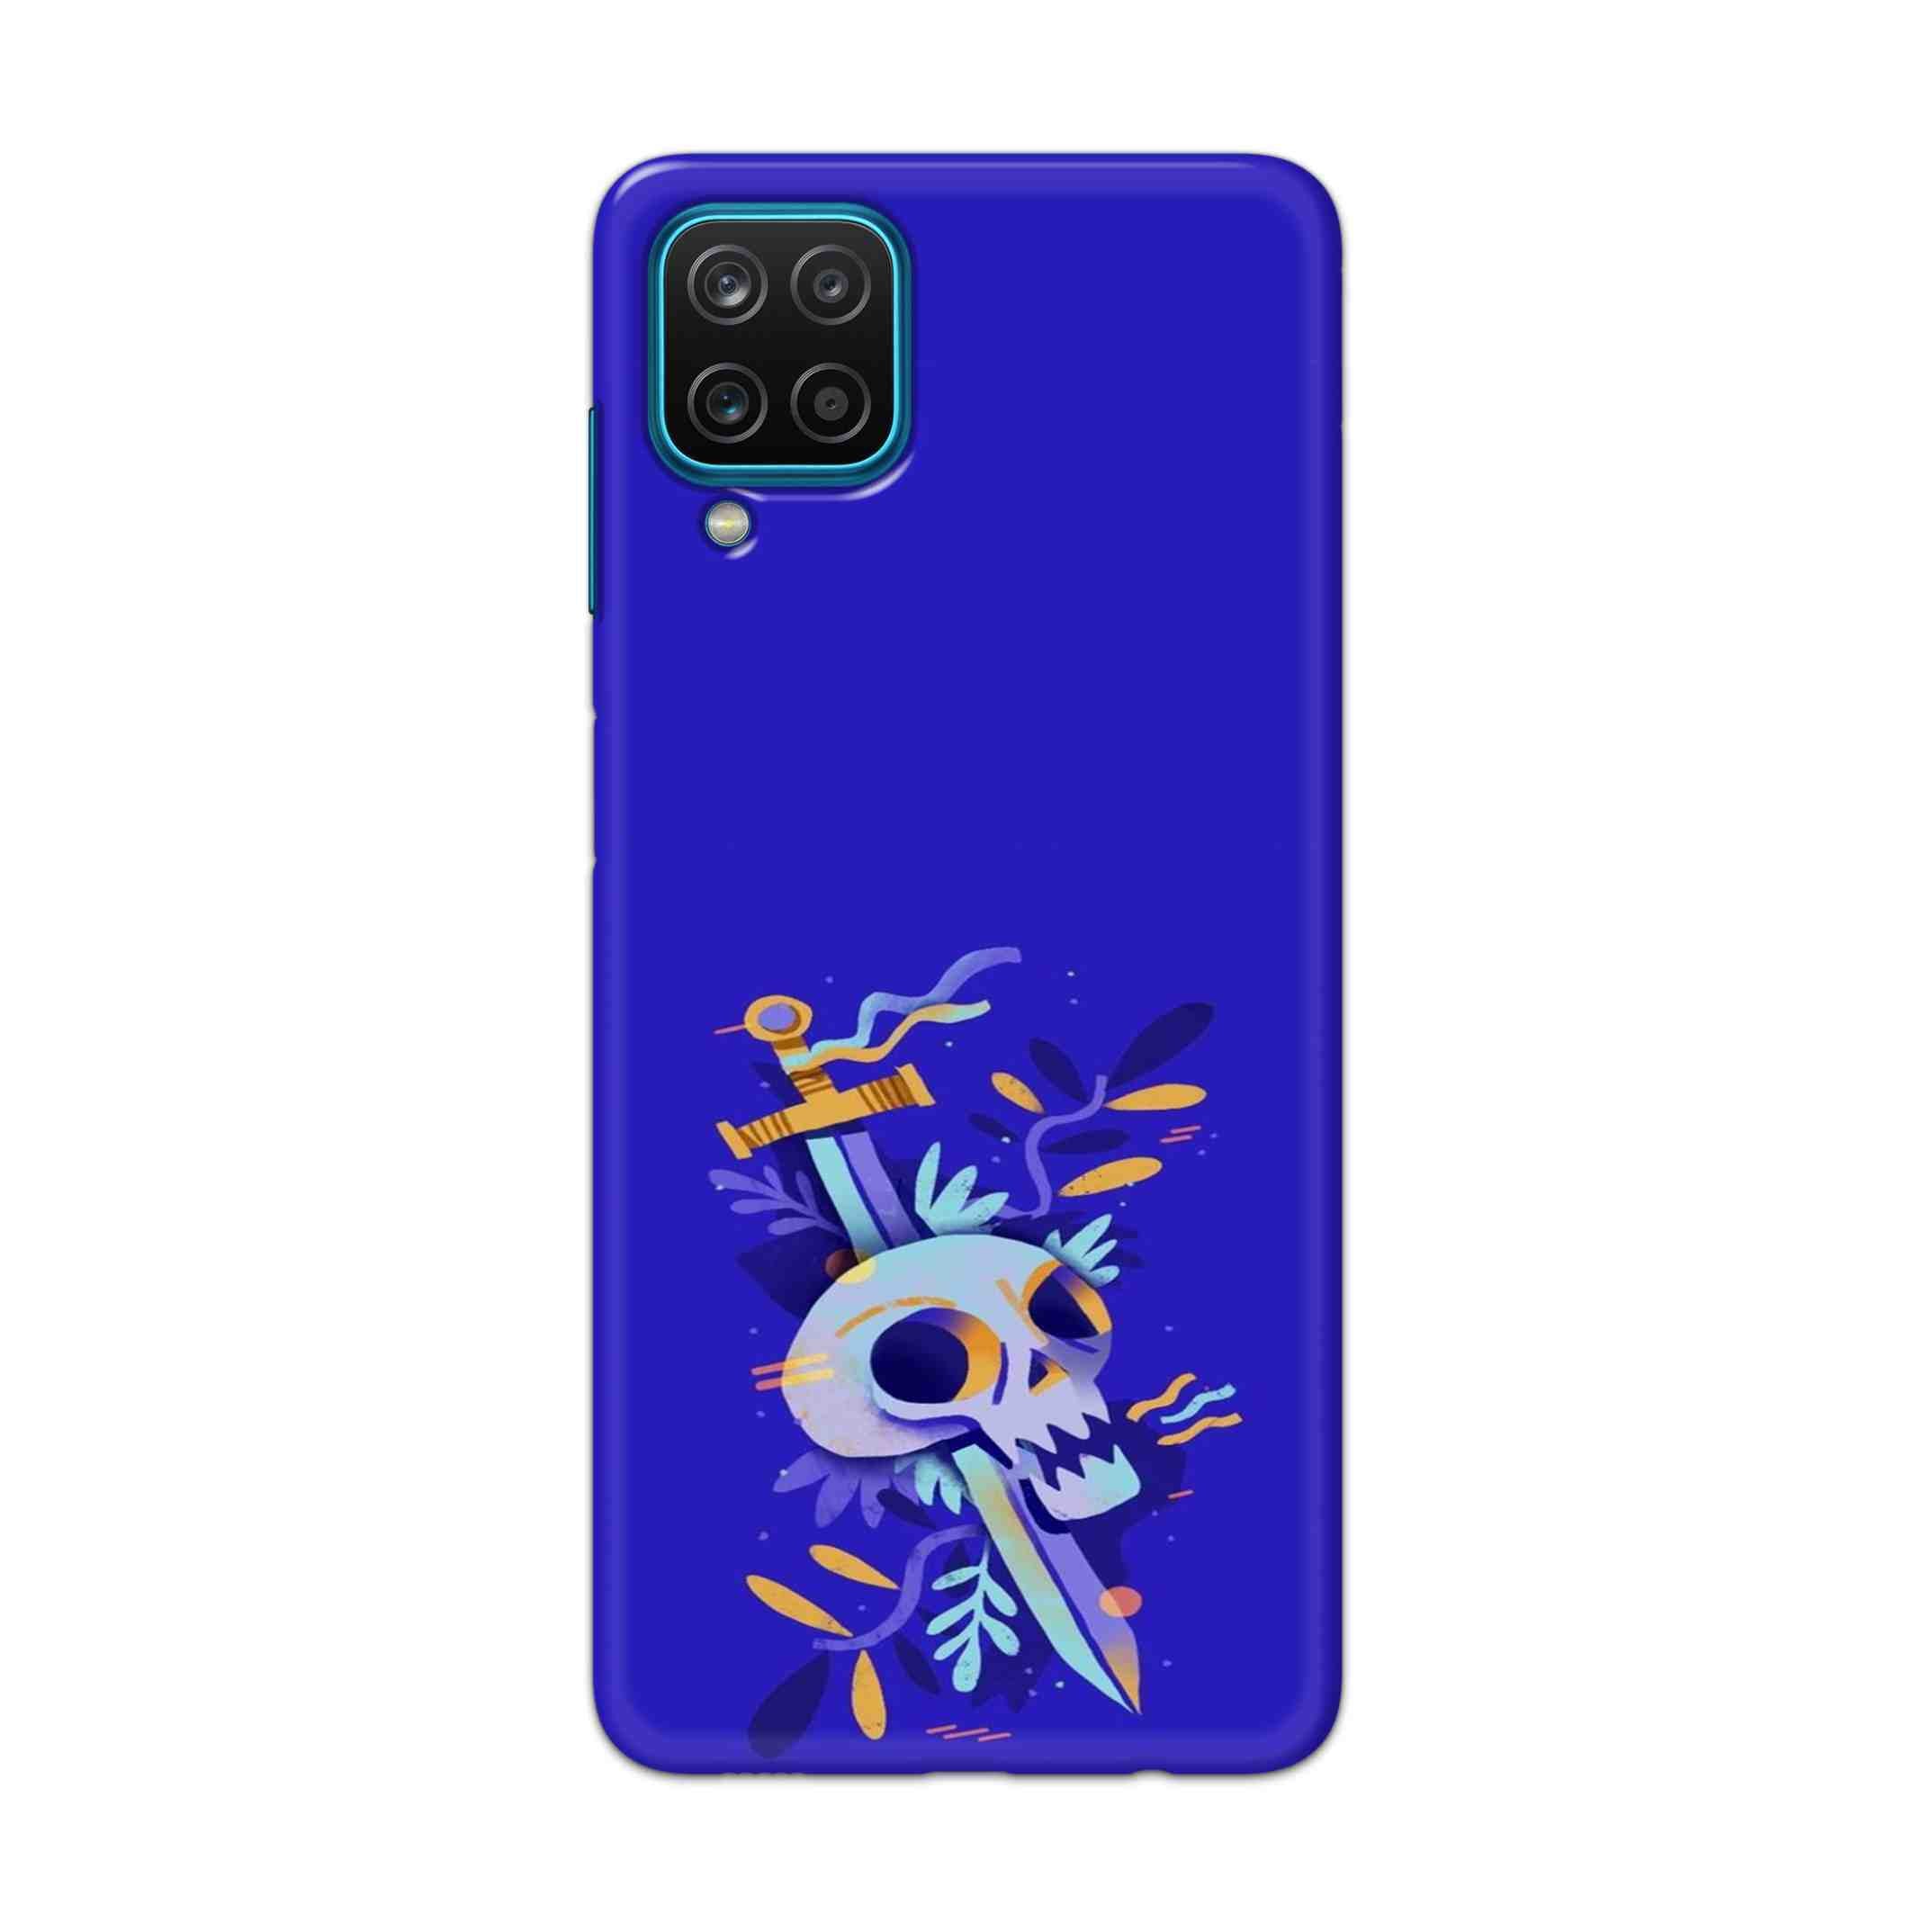 Buy Blue Skull Hard Back Mobile Phone Case Cover For Samsung Galaxy A12 Online